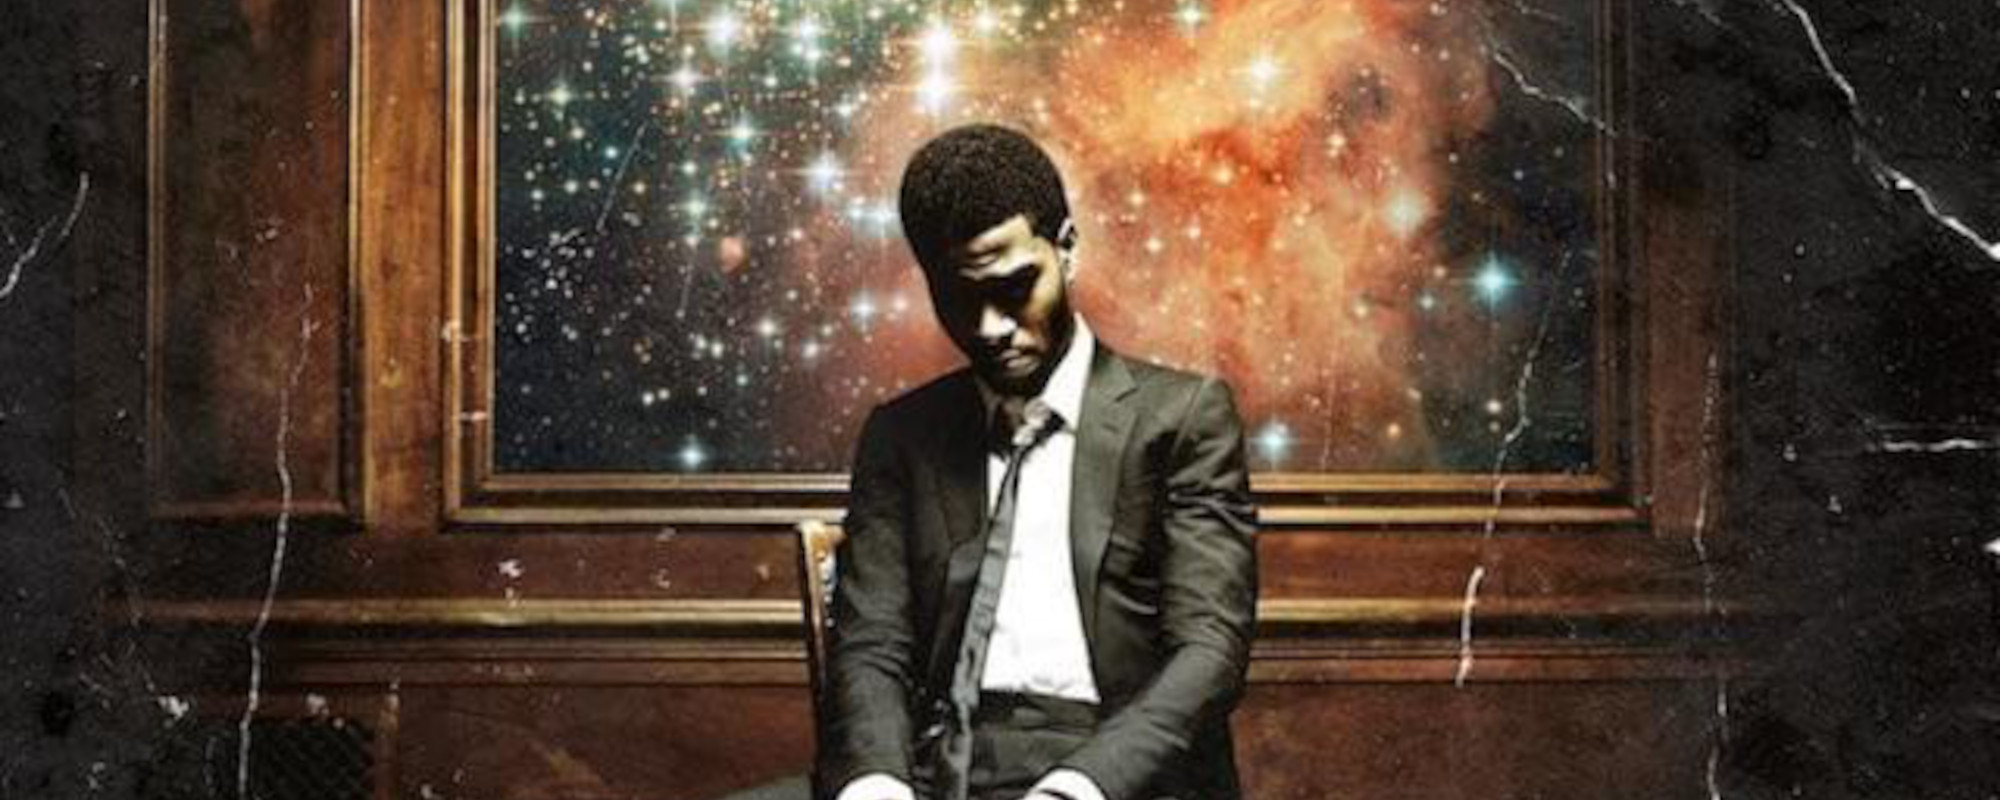 Kid Cudi to be Featured in Brittany Snow’s Directorial Debut Film